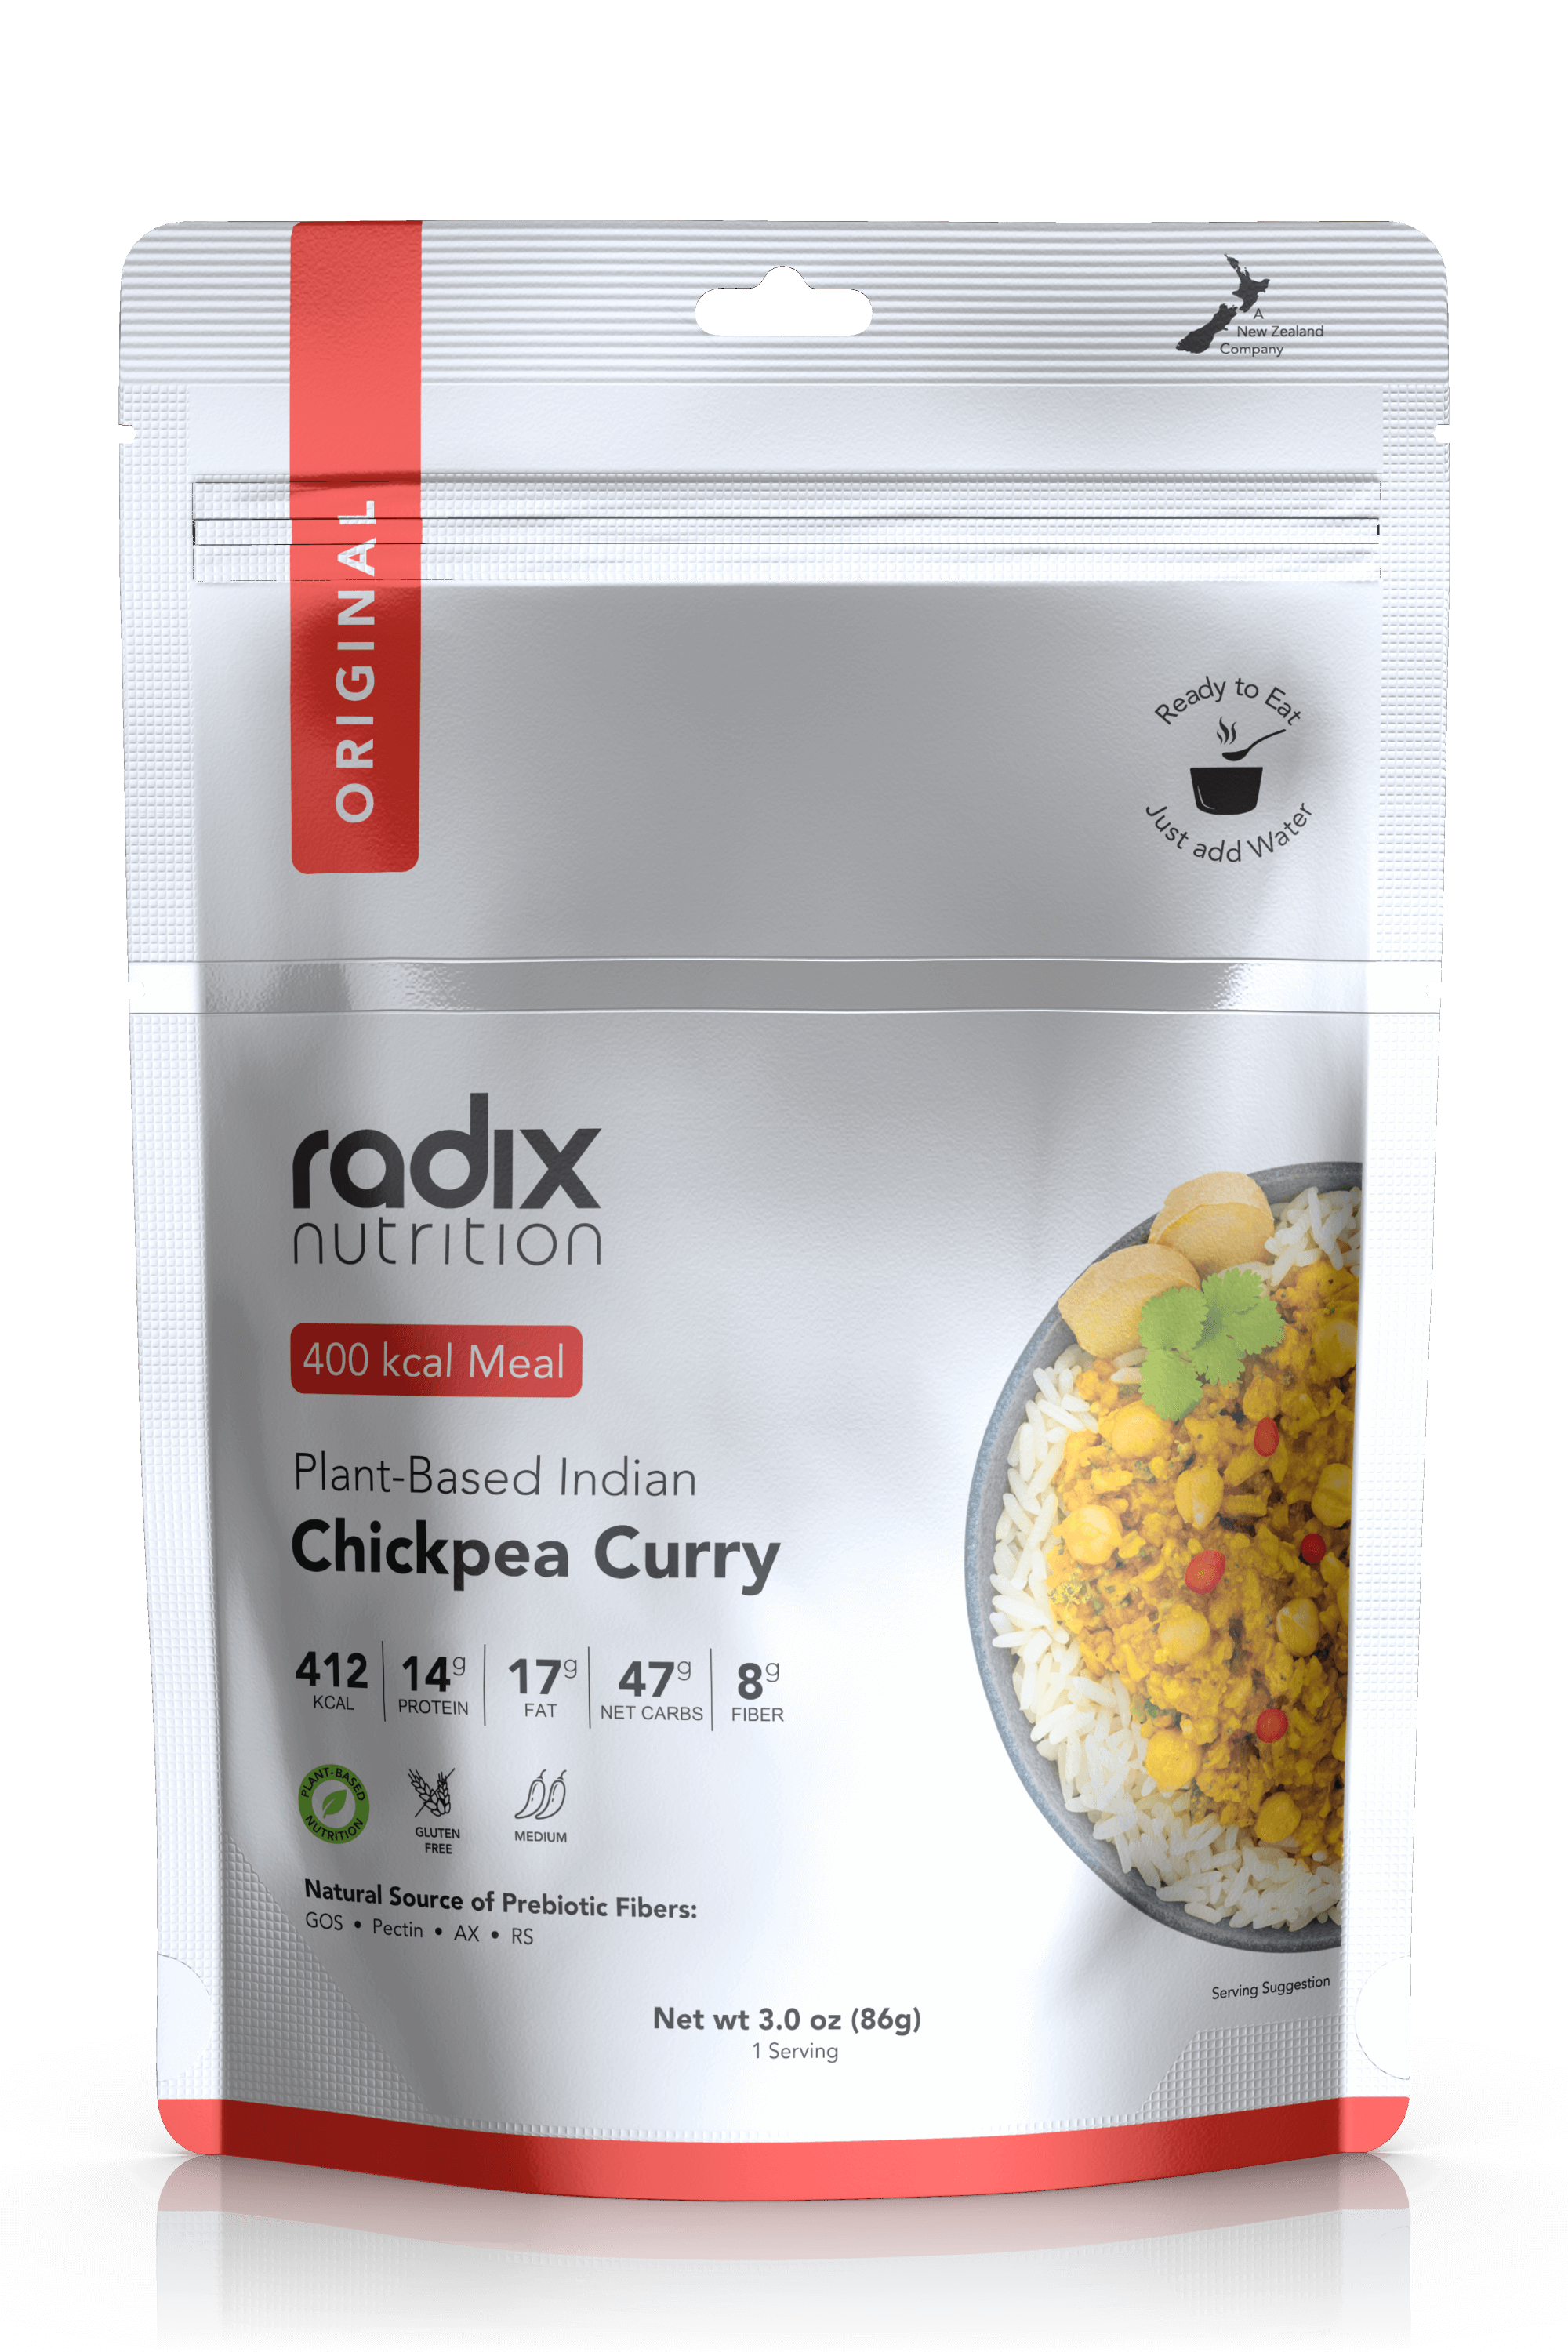 Radix Nutrition Original 400 Plant-Based Indian Chickpea Curry V7 - Tramping Food and Accessories sold by Venture Outdoors NZ